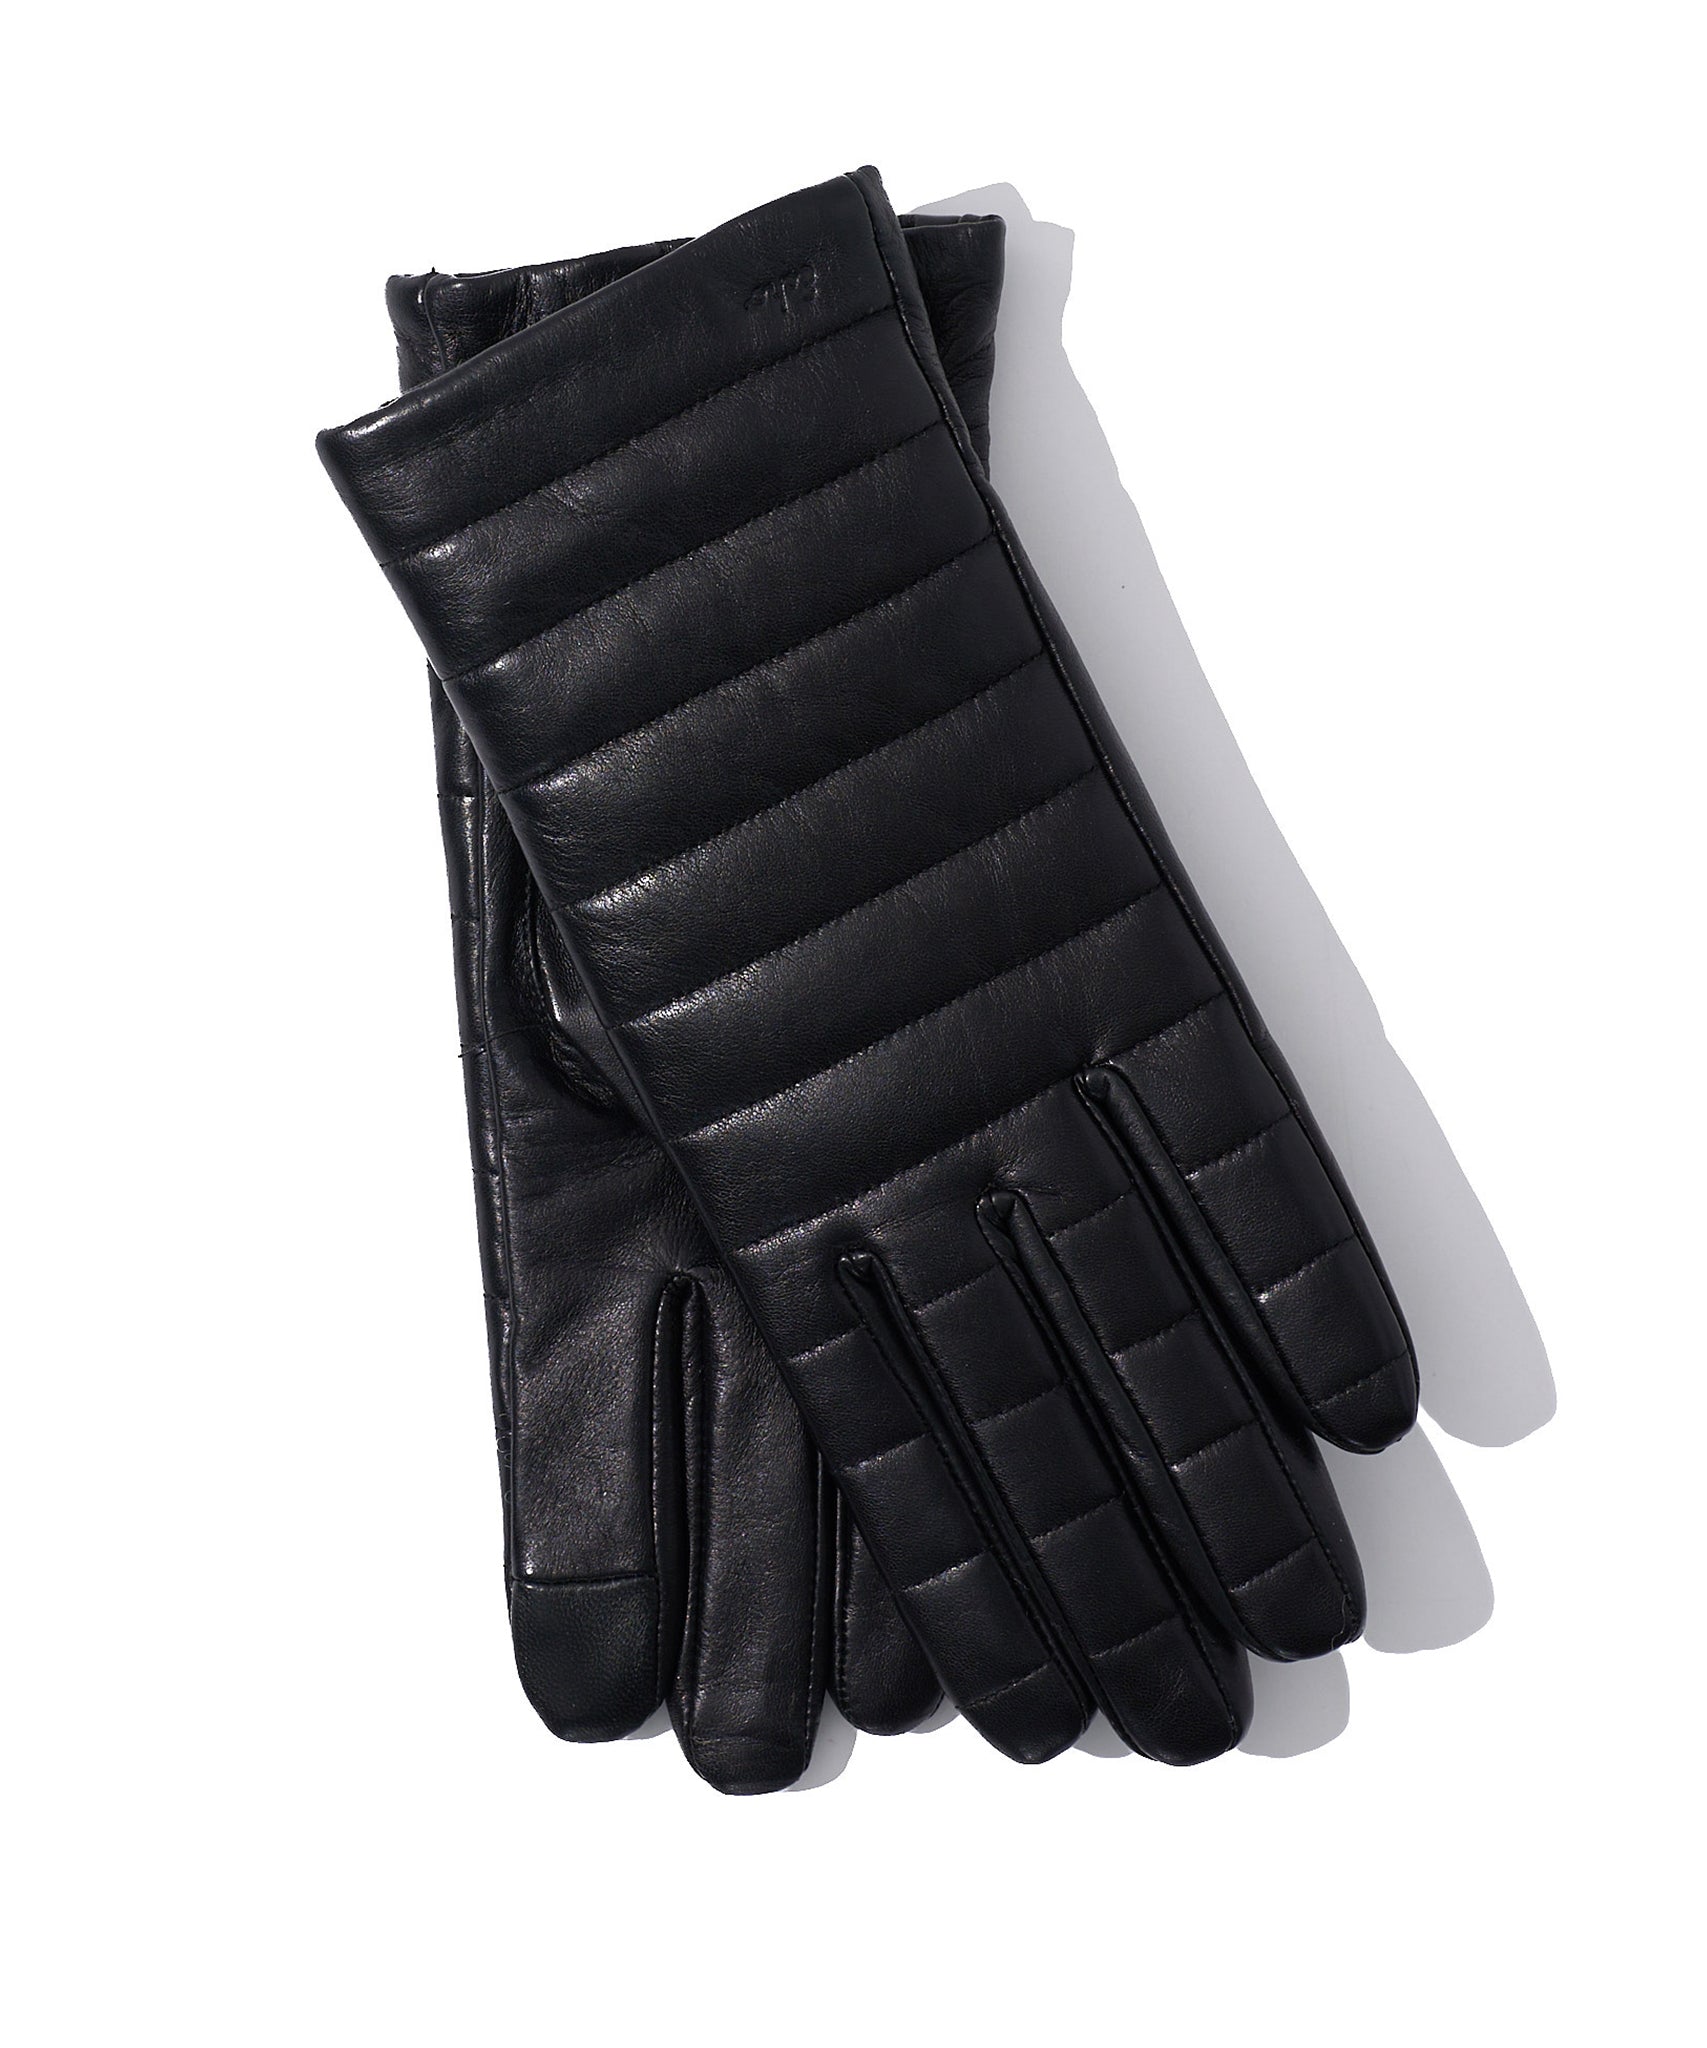 Channel Quilted Leather Glove in color Black